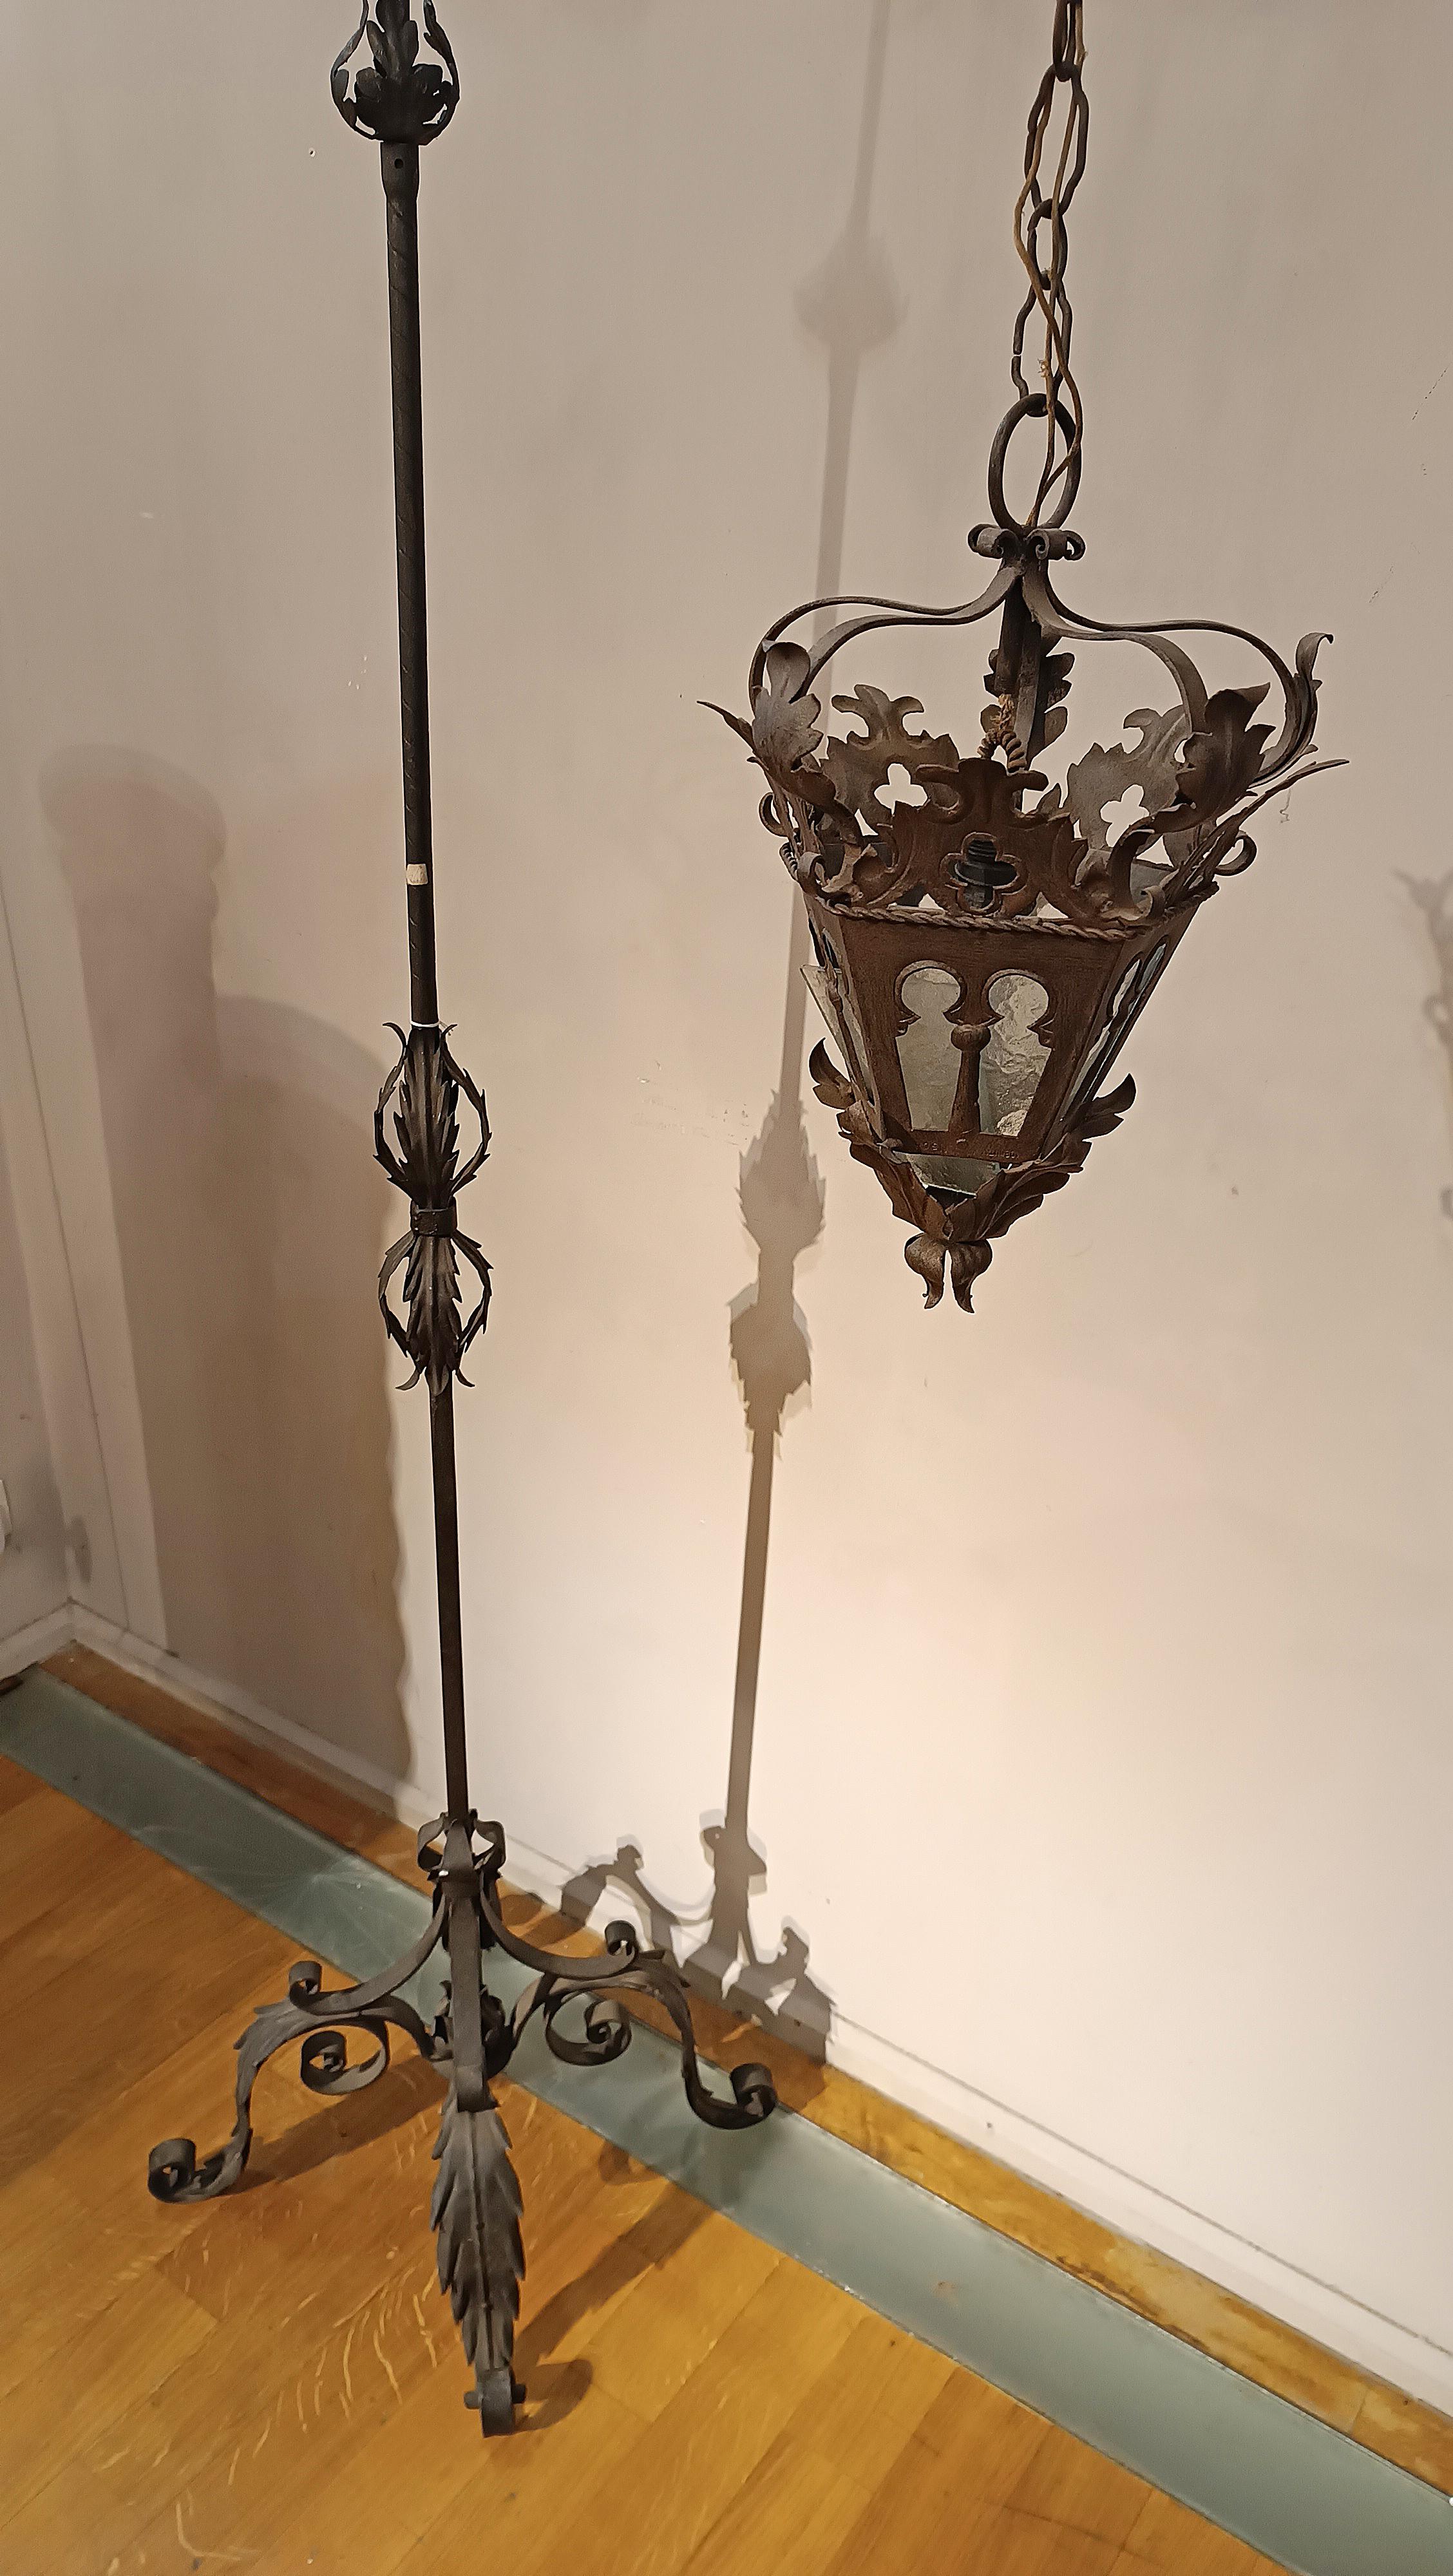 END OF THE 19th CENTURY IRON LANTERN HOLDER For Sale 9